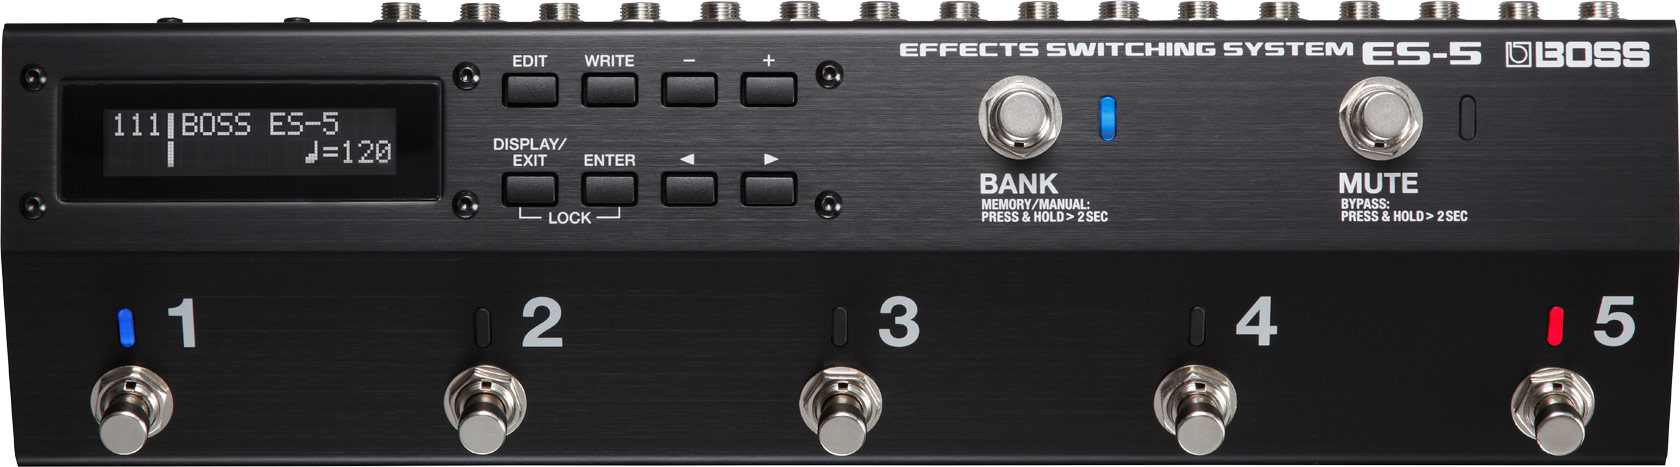 Boss ES-5 Effects Switching System - GigGear